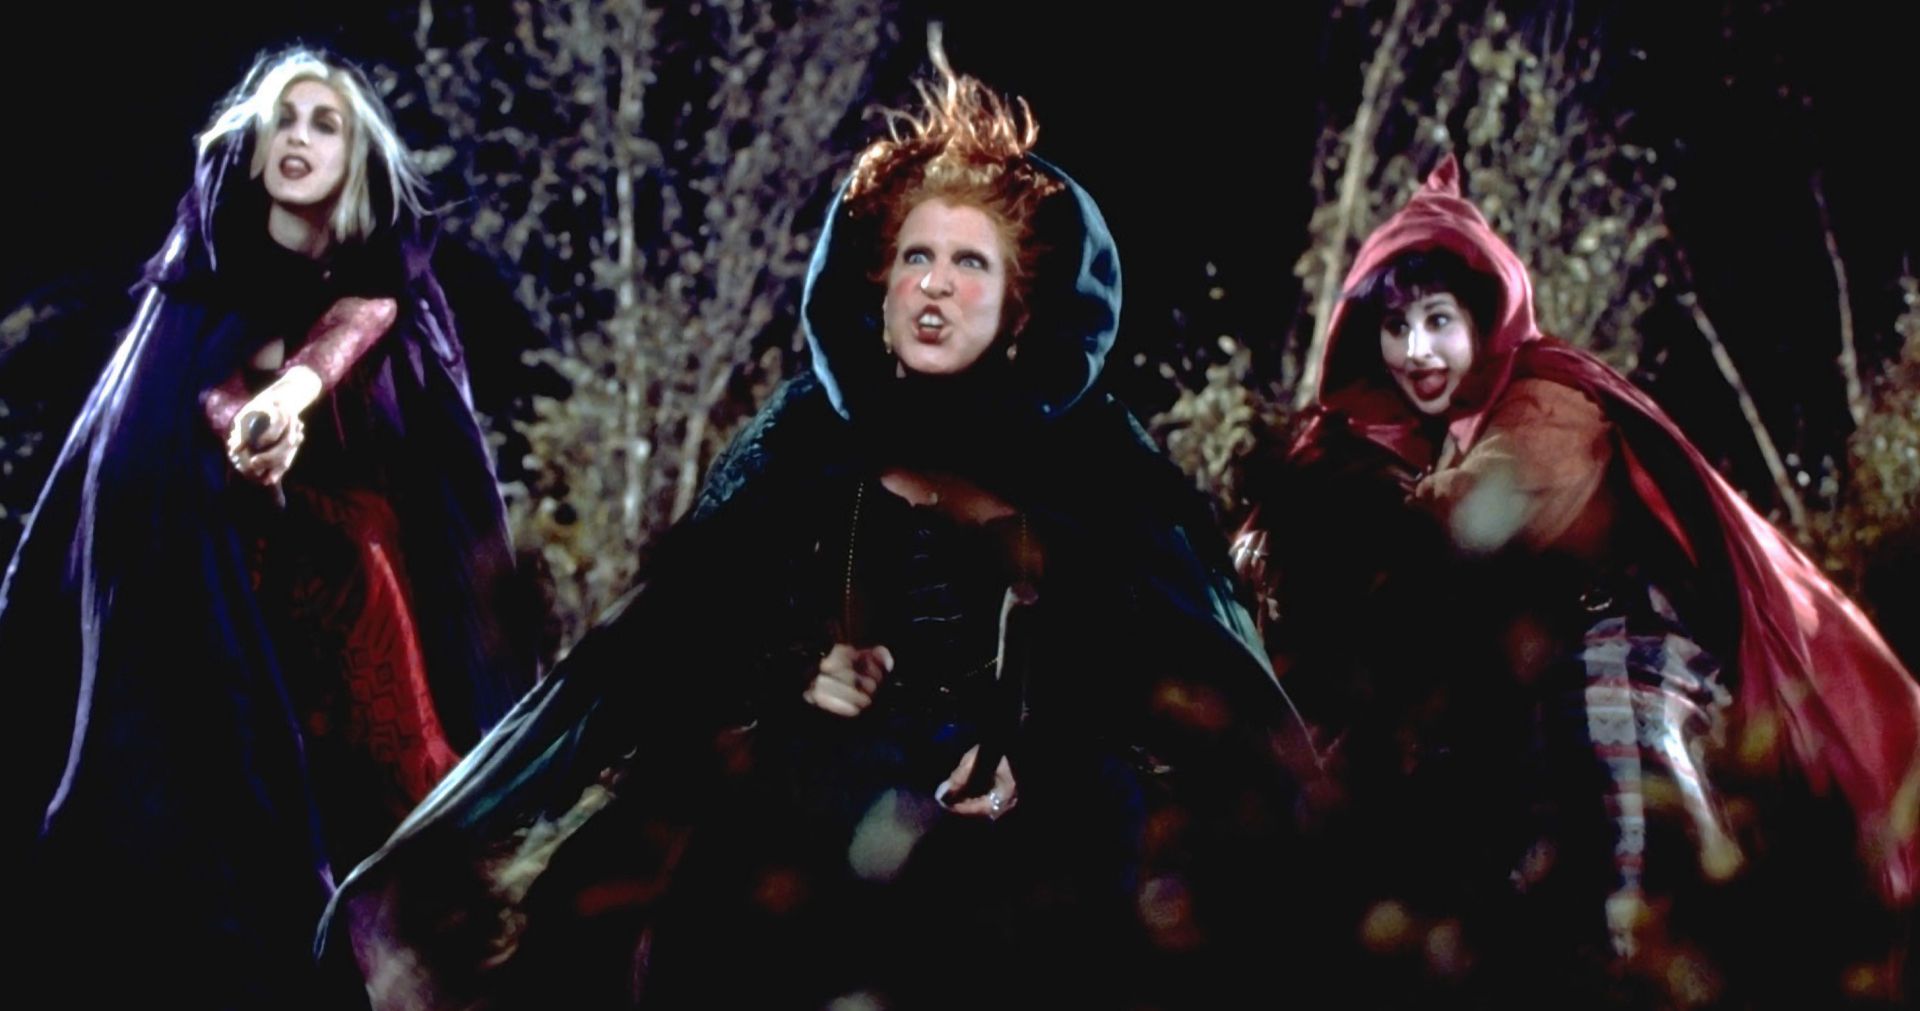 Bette Midler Confirms Hocus Pocus 2 Talks: I Can't Wait to Fly!